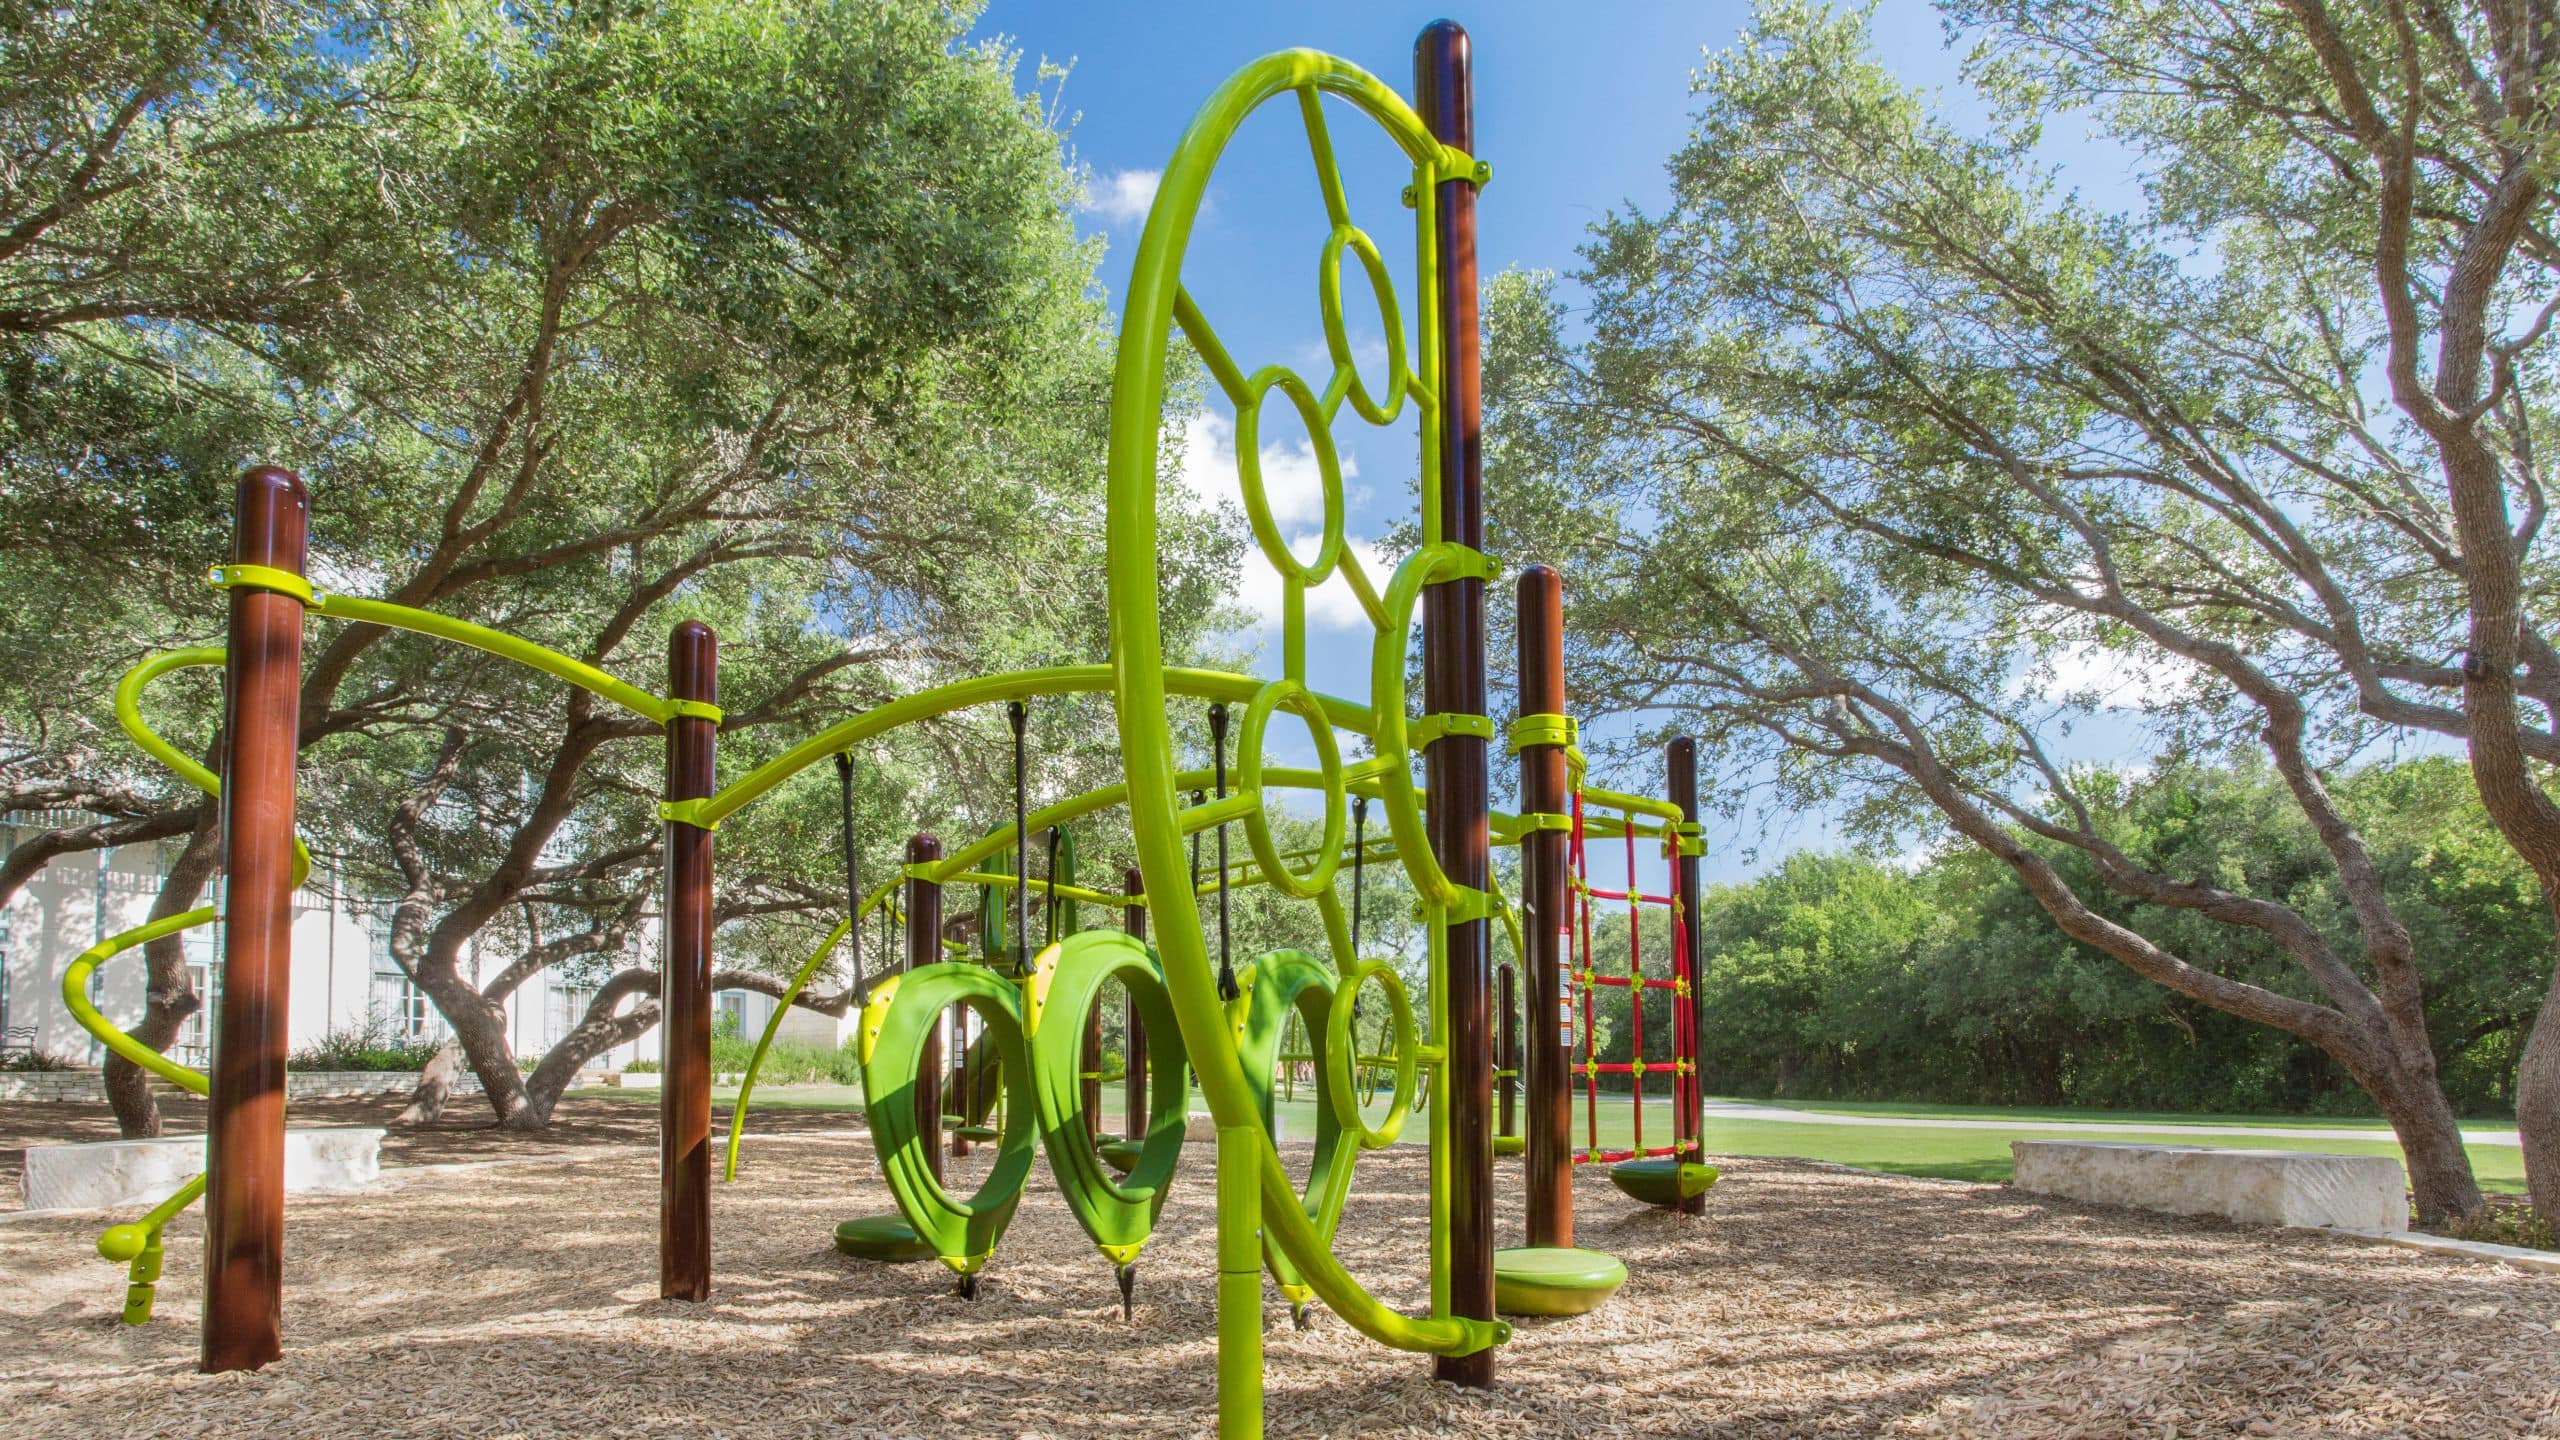 Hyatt Regency Hill Country Resort and Spa Playscape